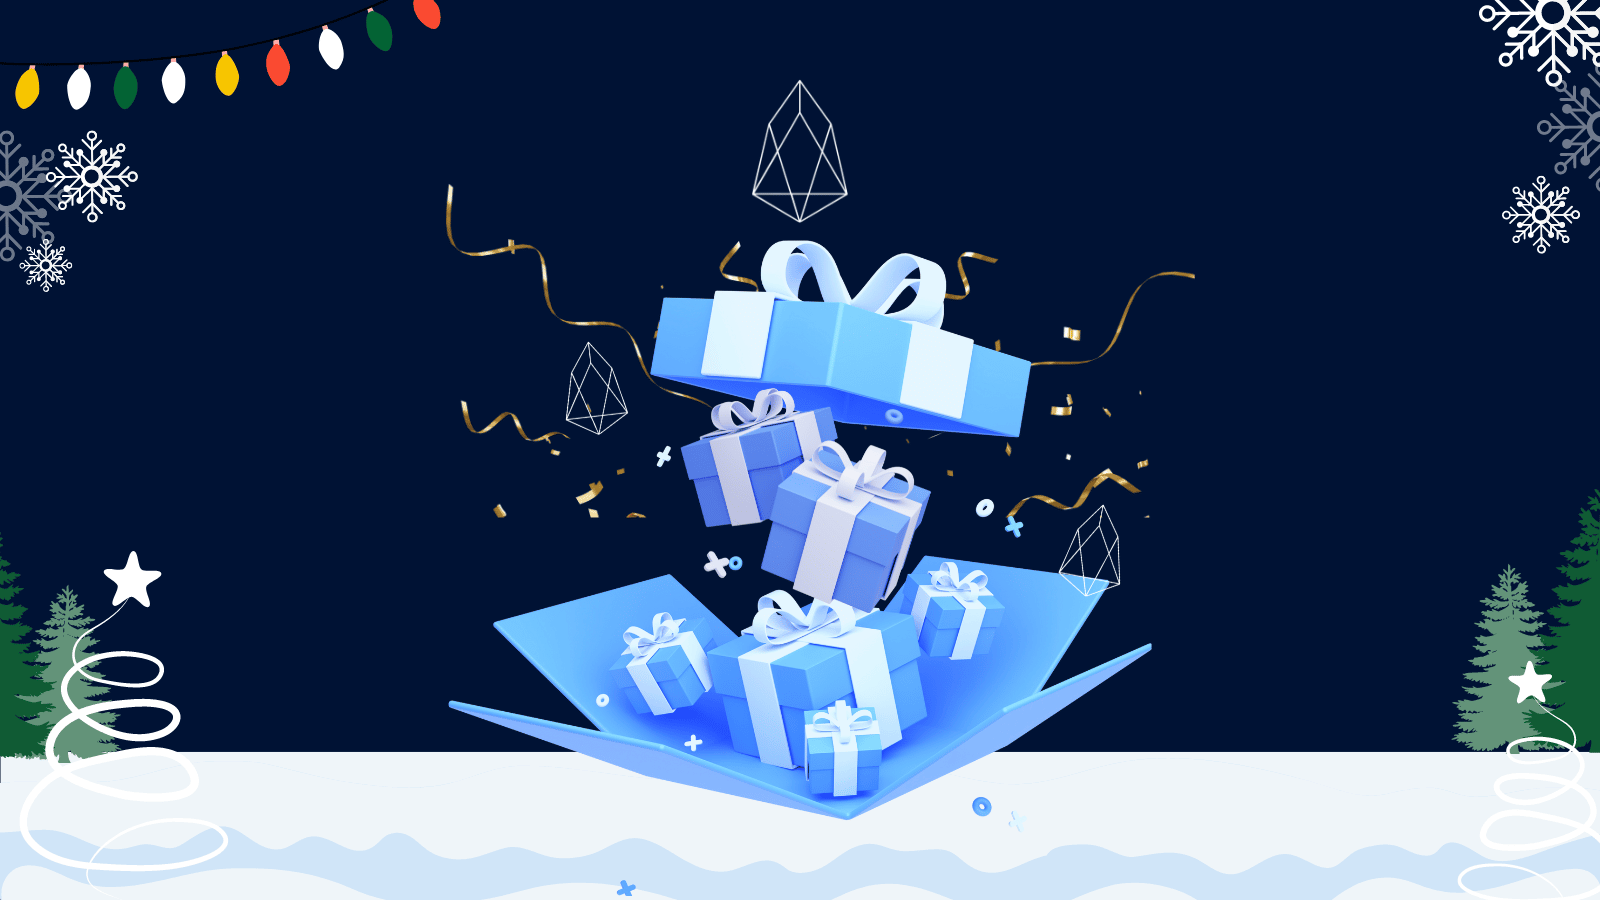 EOS-community-gift-exchange-Twitter-Ad-1.png